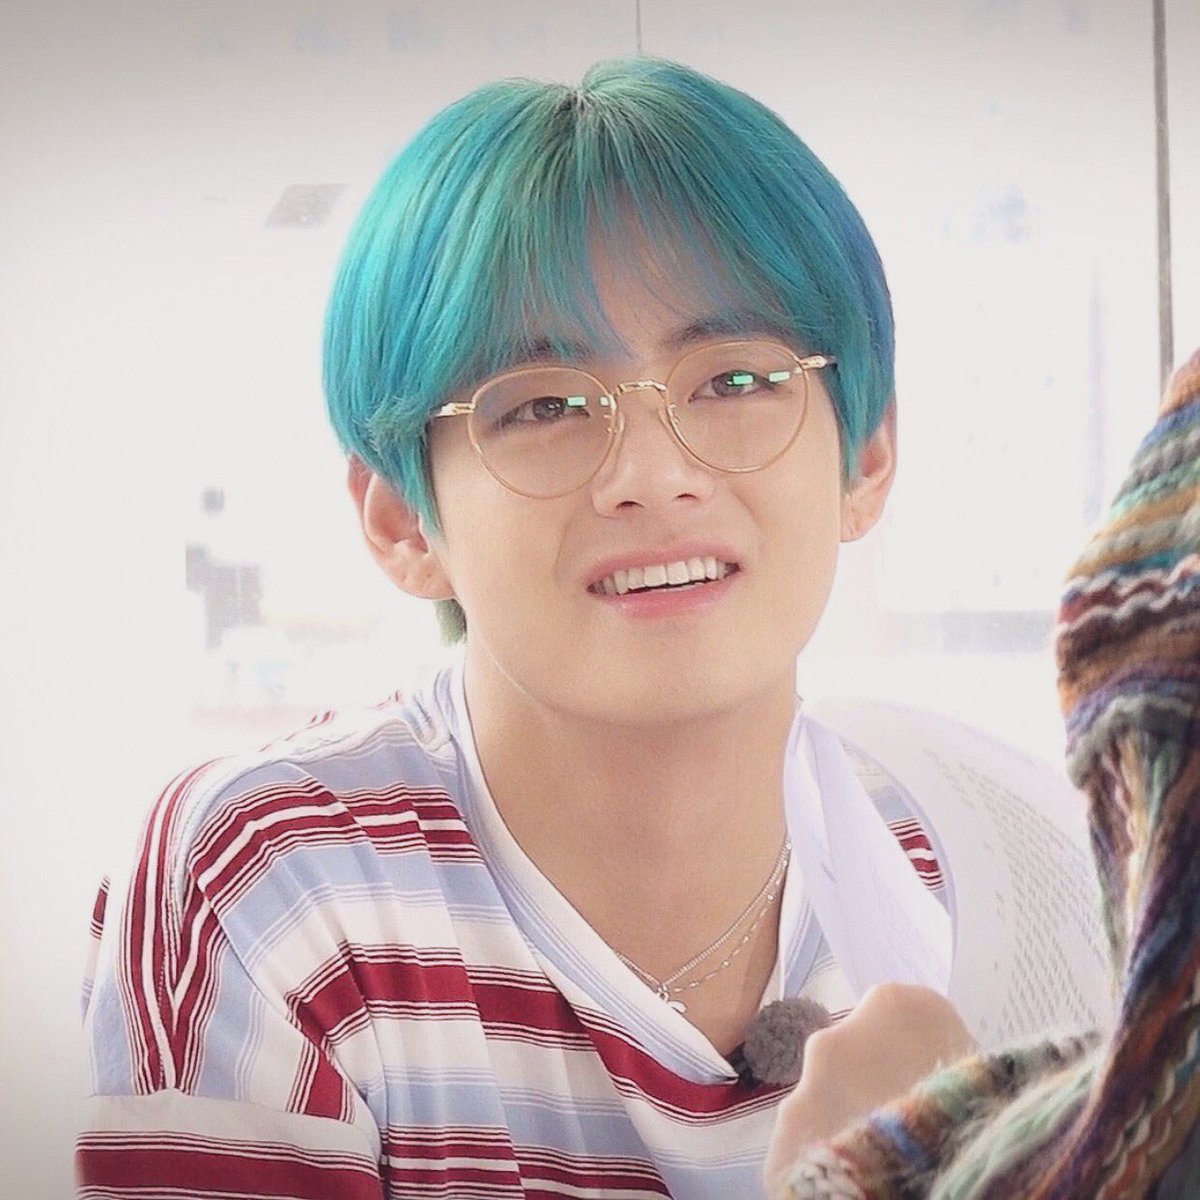 Thread of BTS Taehyung's comforting comments on weverse~°°~♡~°°~♡a thread we all needed♡ @BTS_twt  #TAEHYUNG